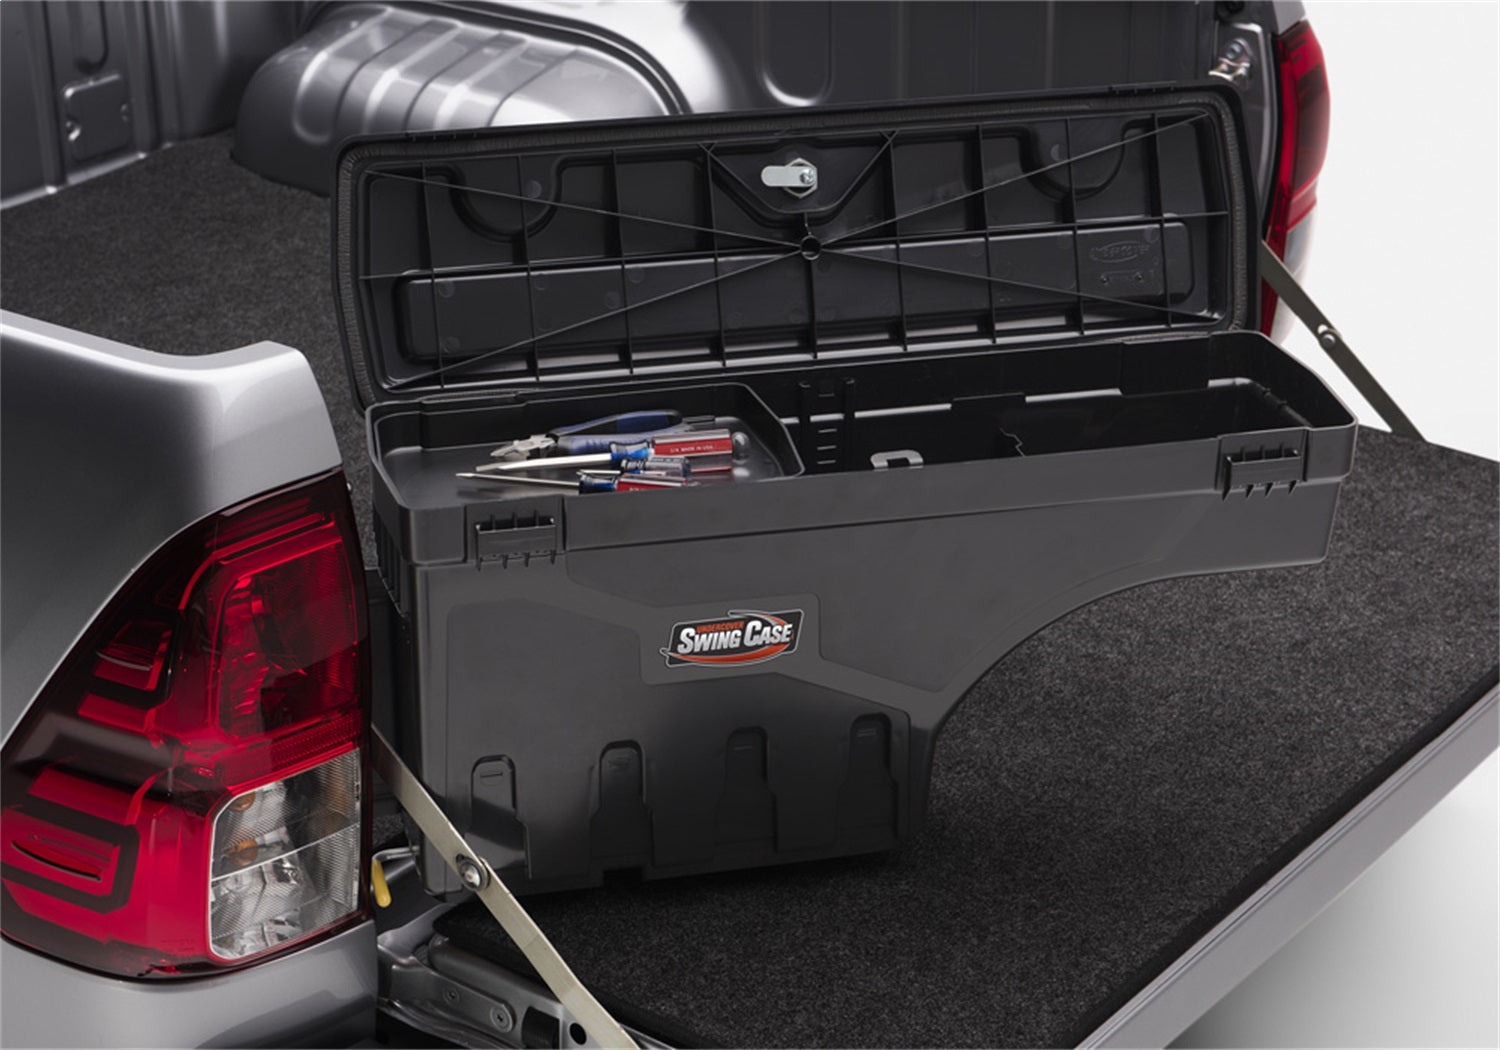 UnderCover SC401D Swing Case Storage Box Fits 05-21 Tacoma